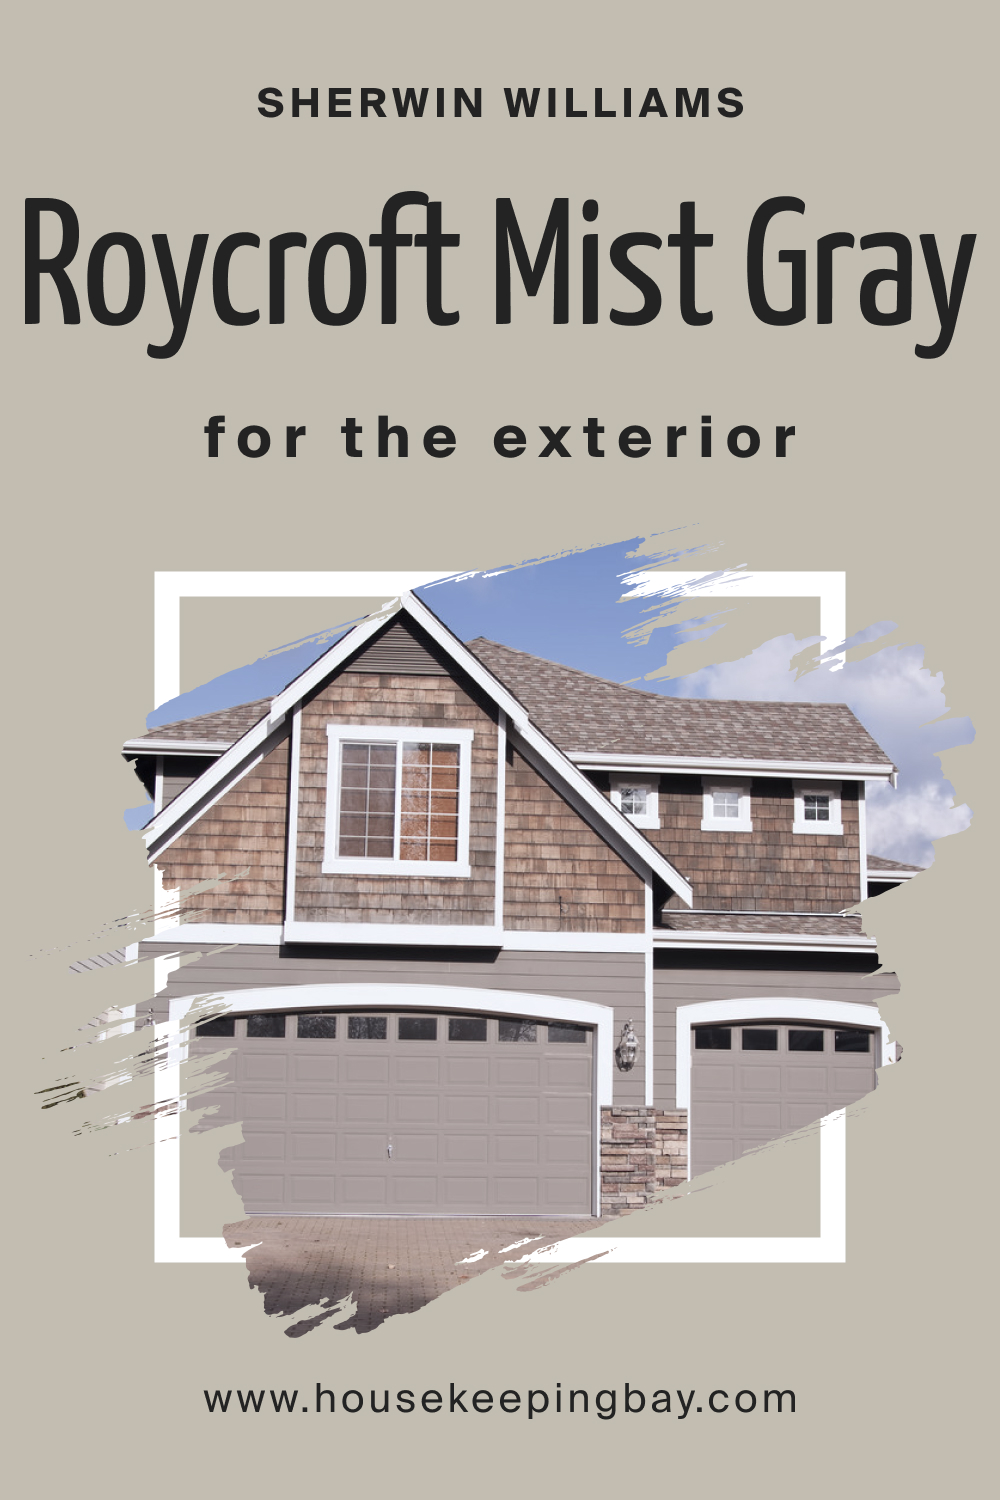 Sherwin Williams. SW 2844 Roycroft Mist Gray For the exterior